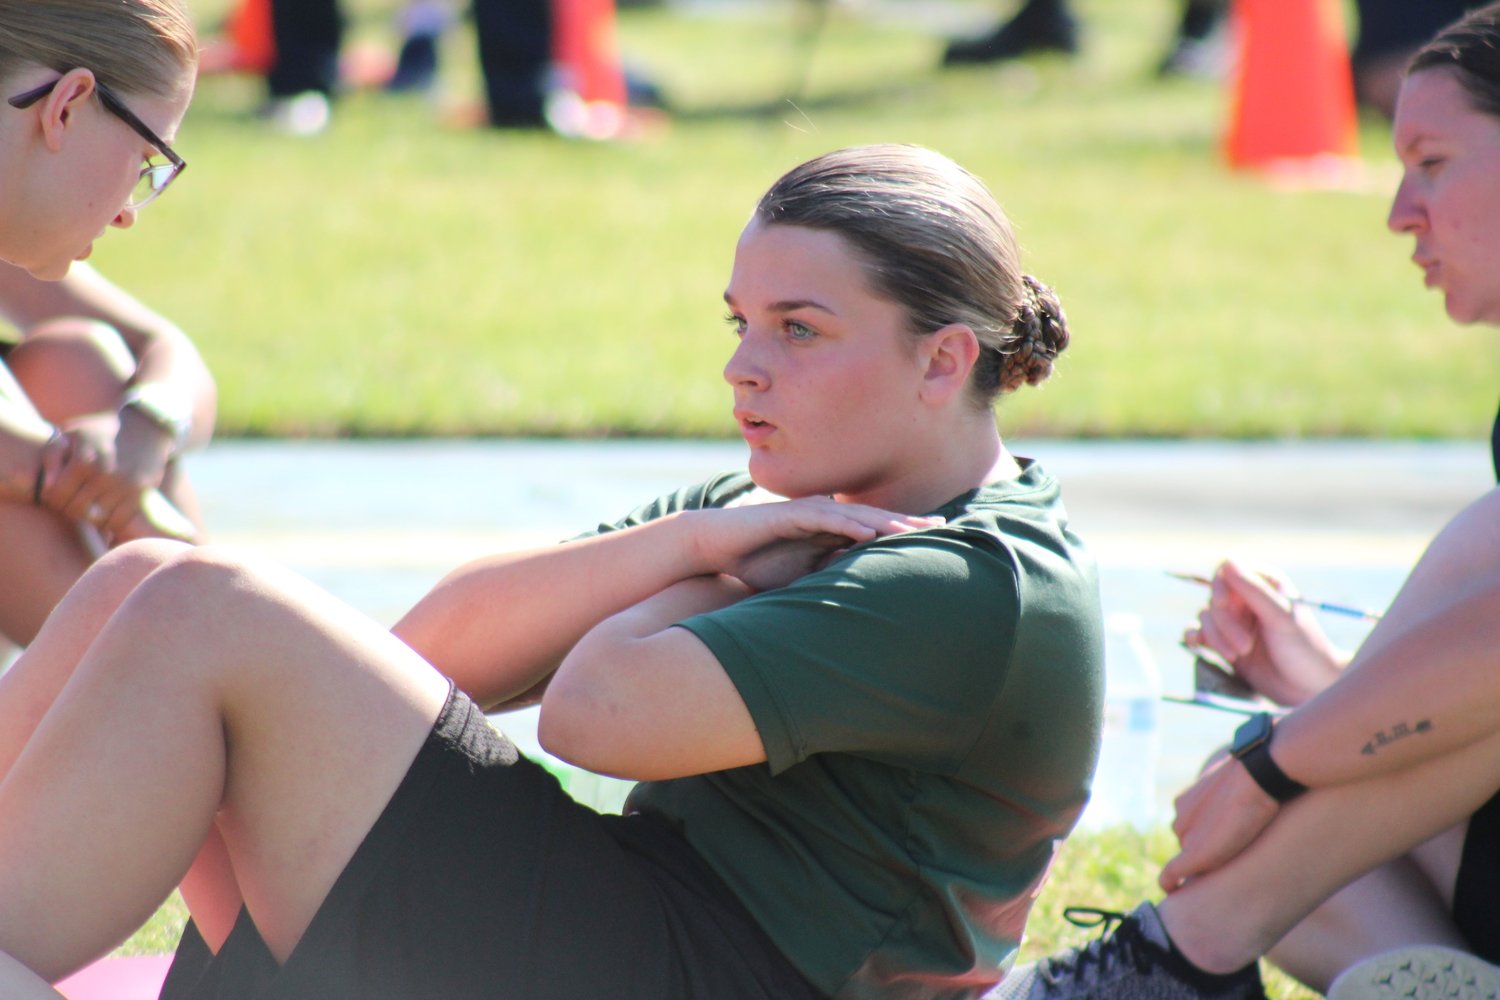 Nease NJROTC cadet Emmelie Neff performs one of her 315 total sit-ups to place second individually at the 2022 Navy National Academic, Athletic and Drill Championships in Pensacola on April 1.